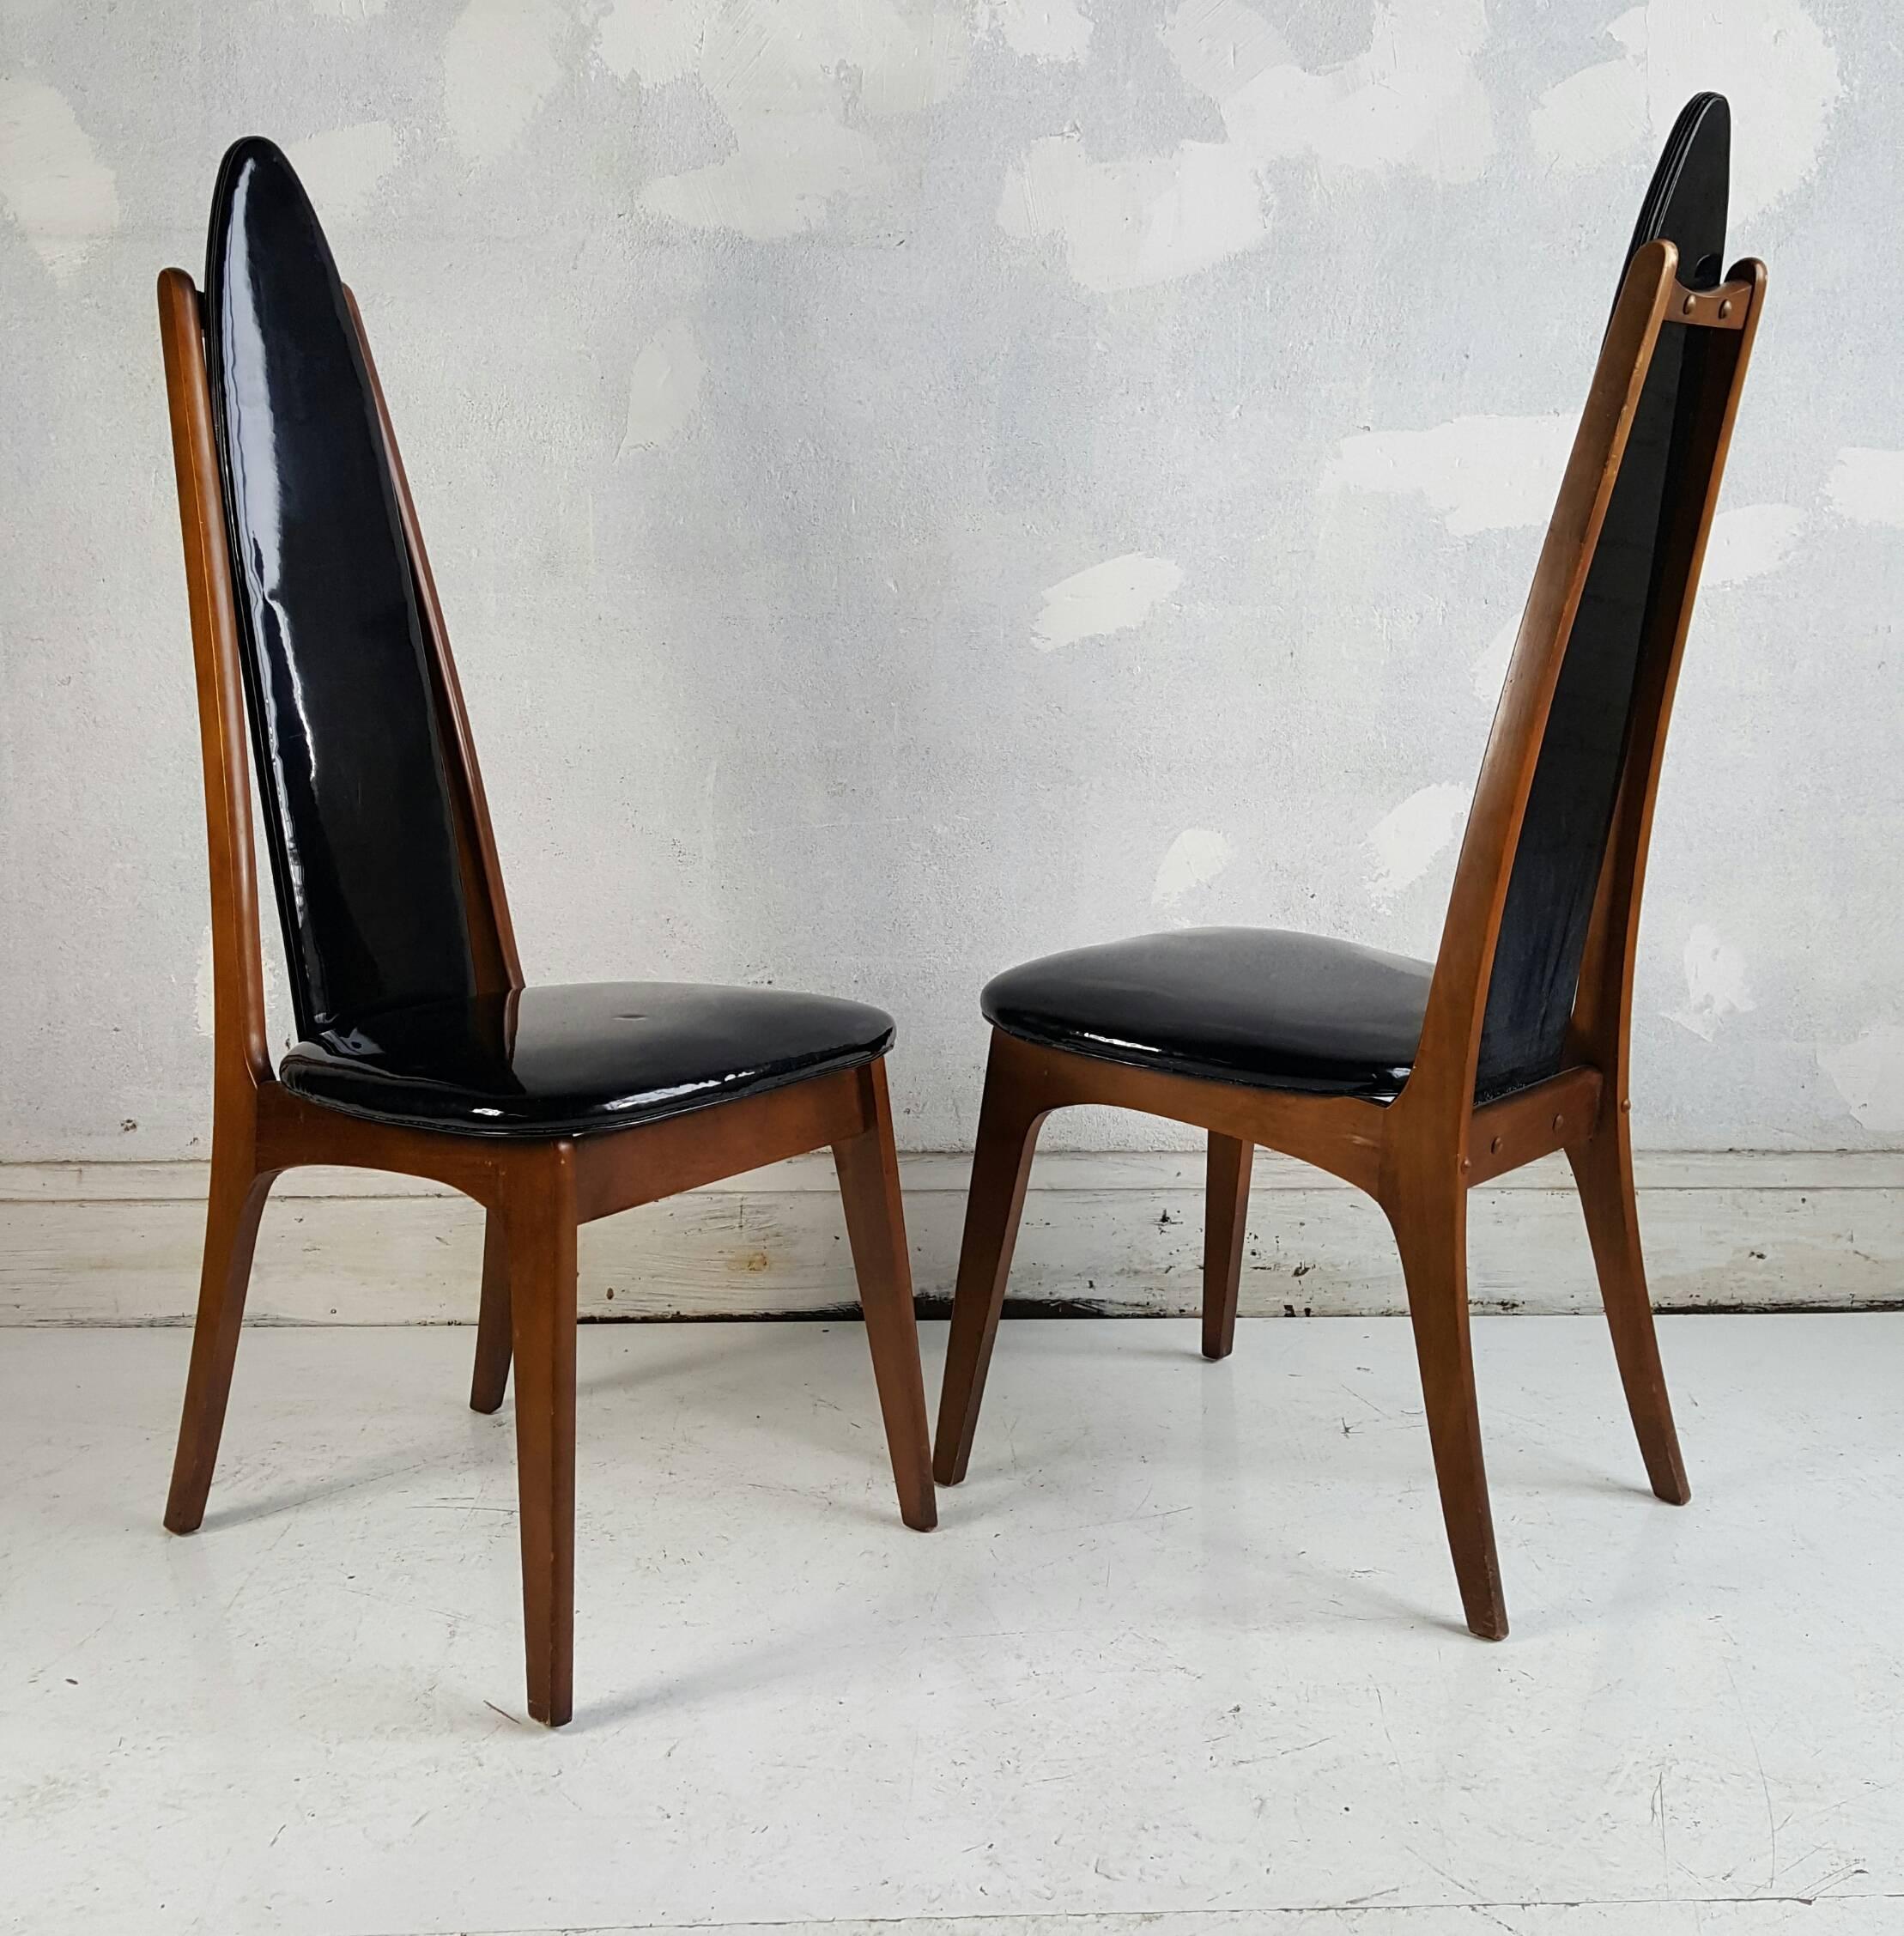 Dramatic set of four black patent leather and walnut dining chairs, Hollywood Regency, Mid-Century Modern, excellent original condition. Whimsical, sculptural design, high-back, made in Montreal.